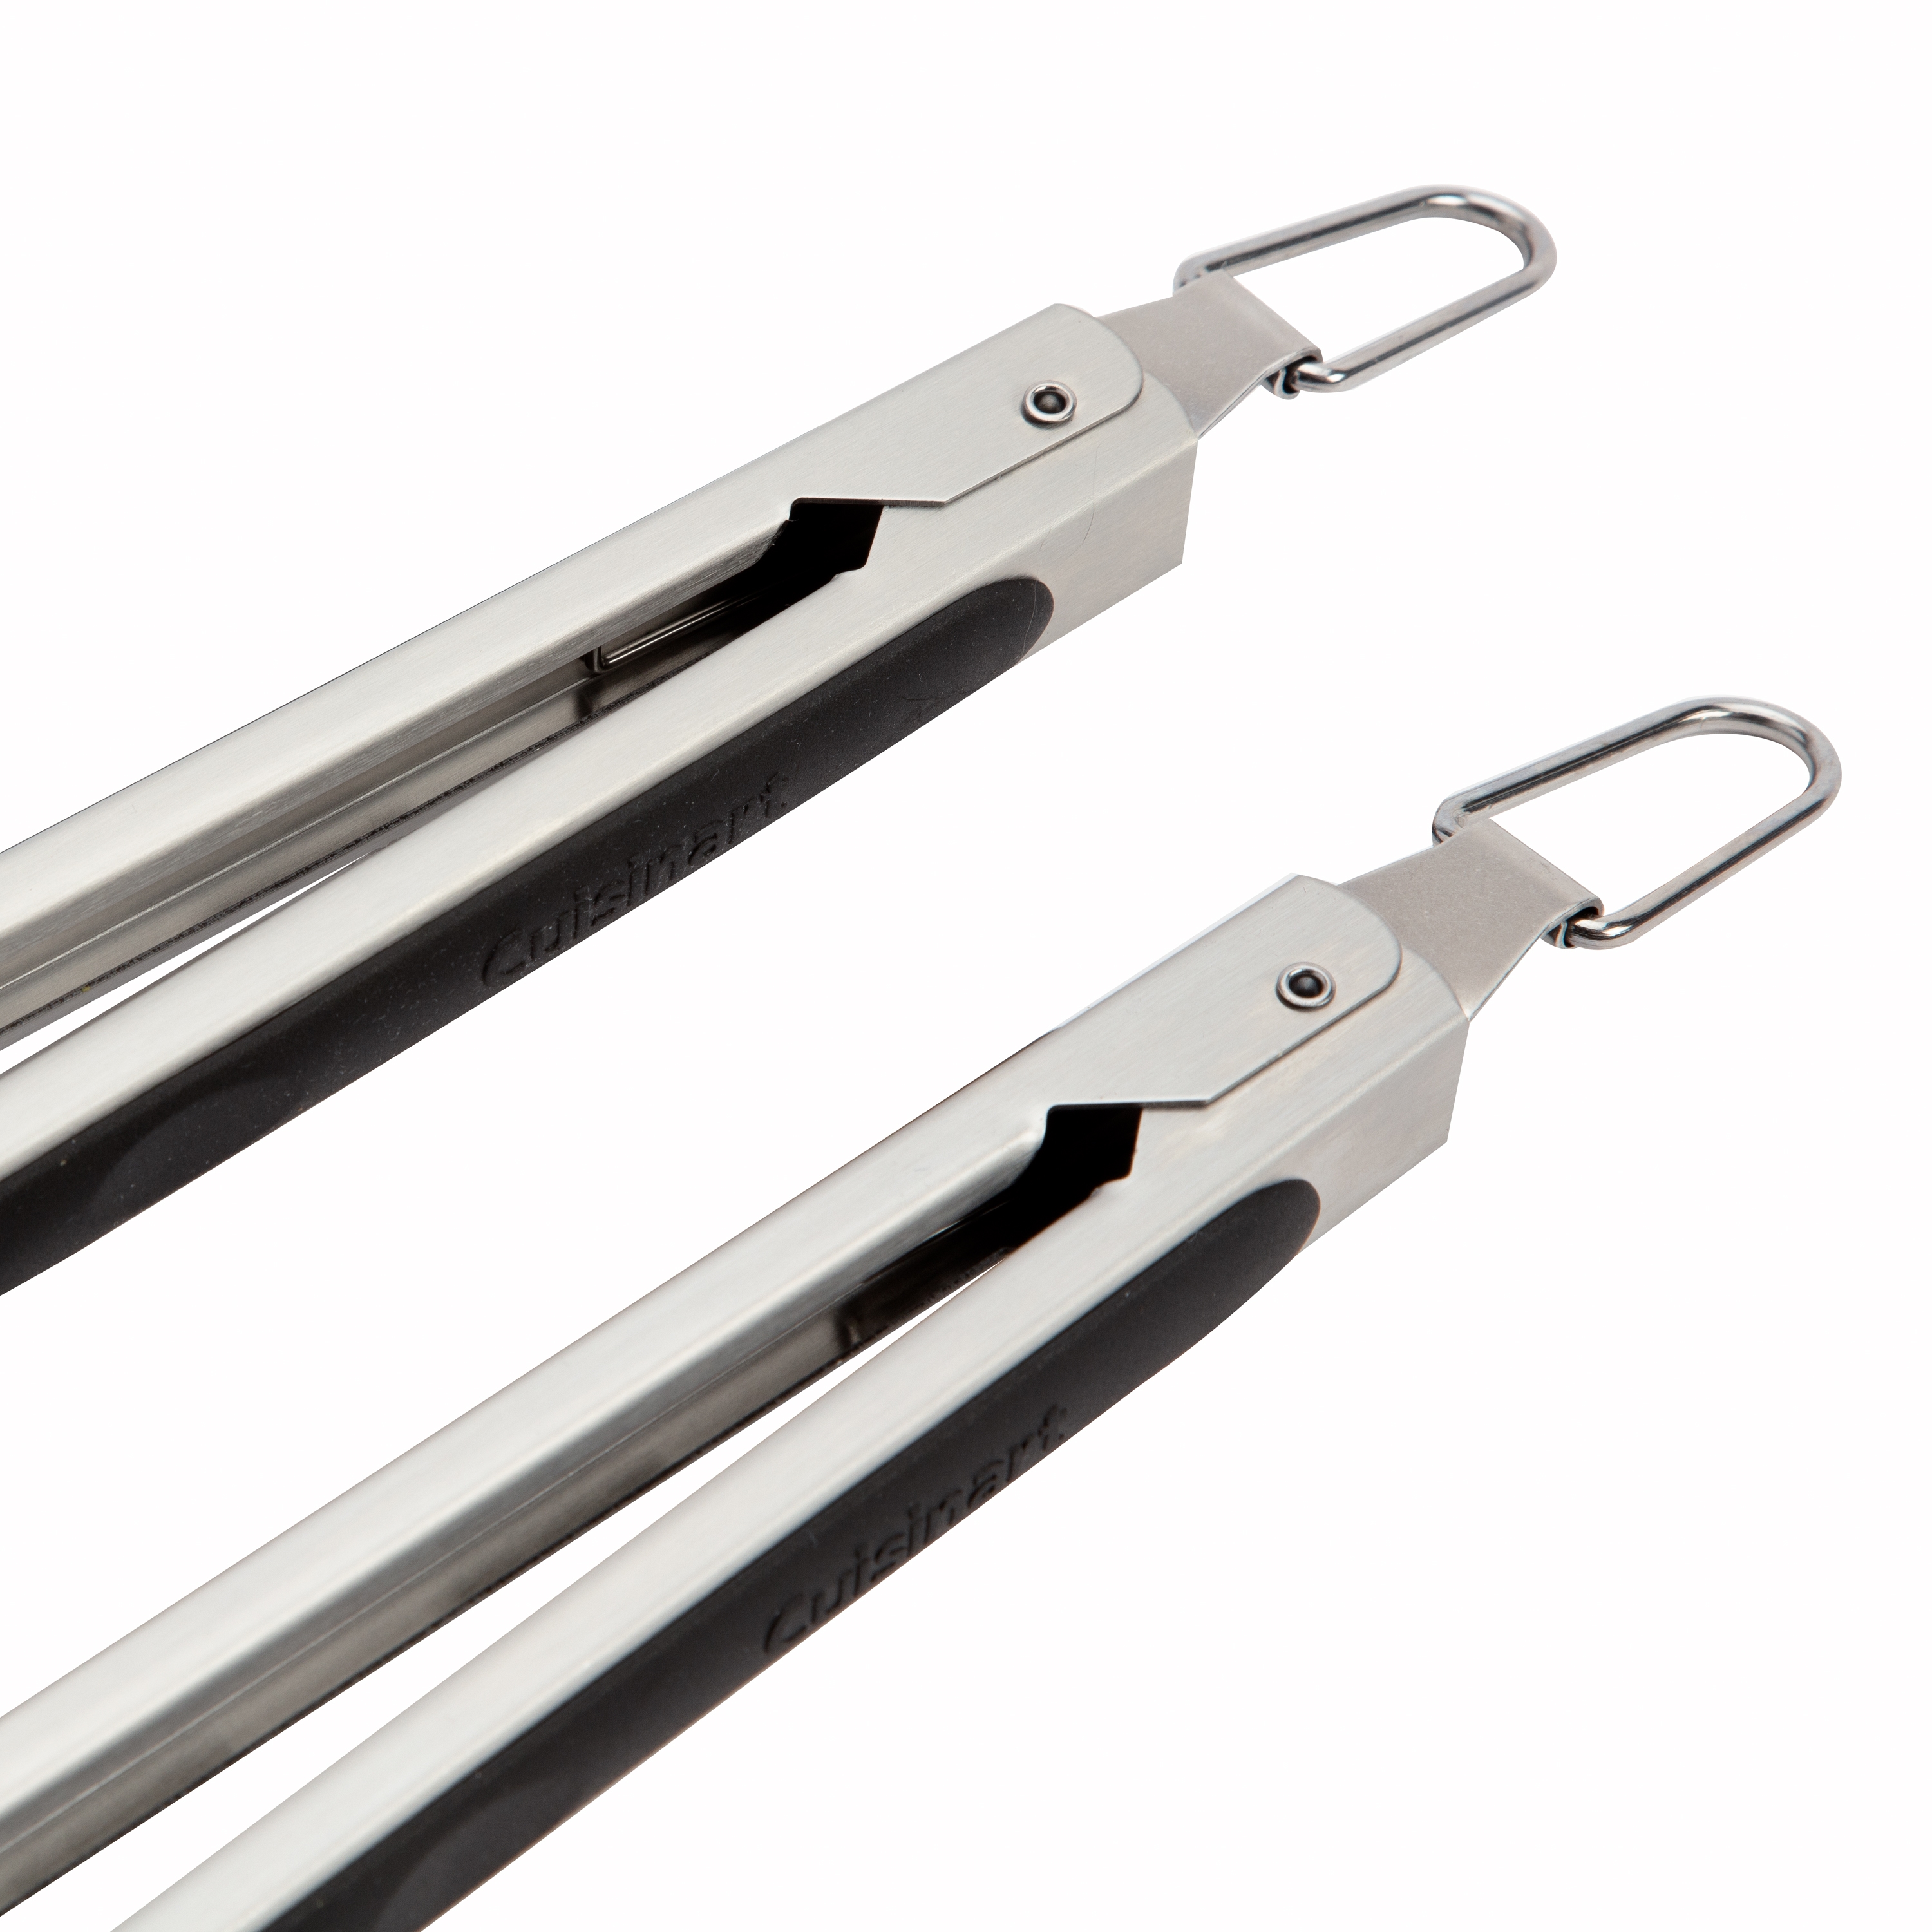 Cuisinart 2pc Tong Set: 7 and 9 Stainless Steel Tongs